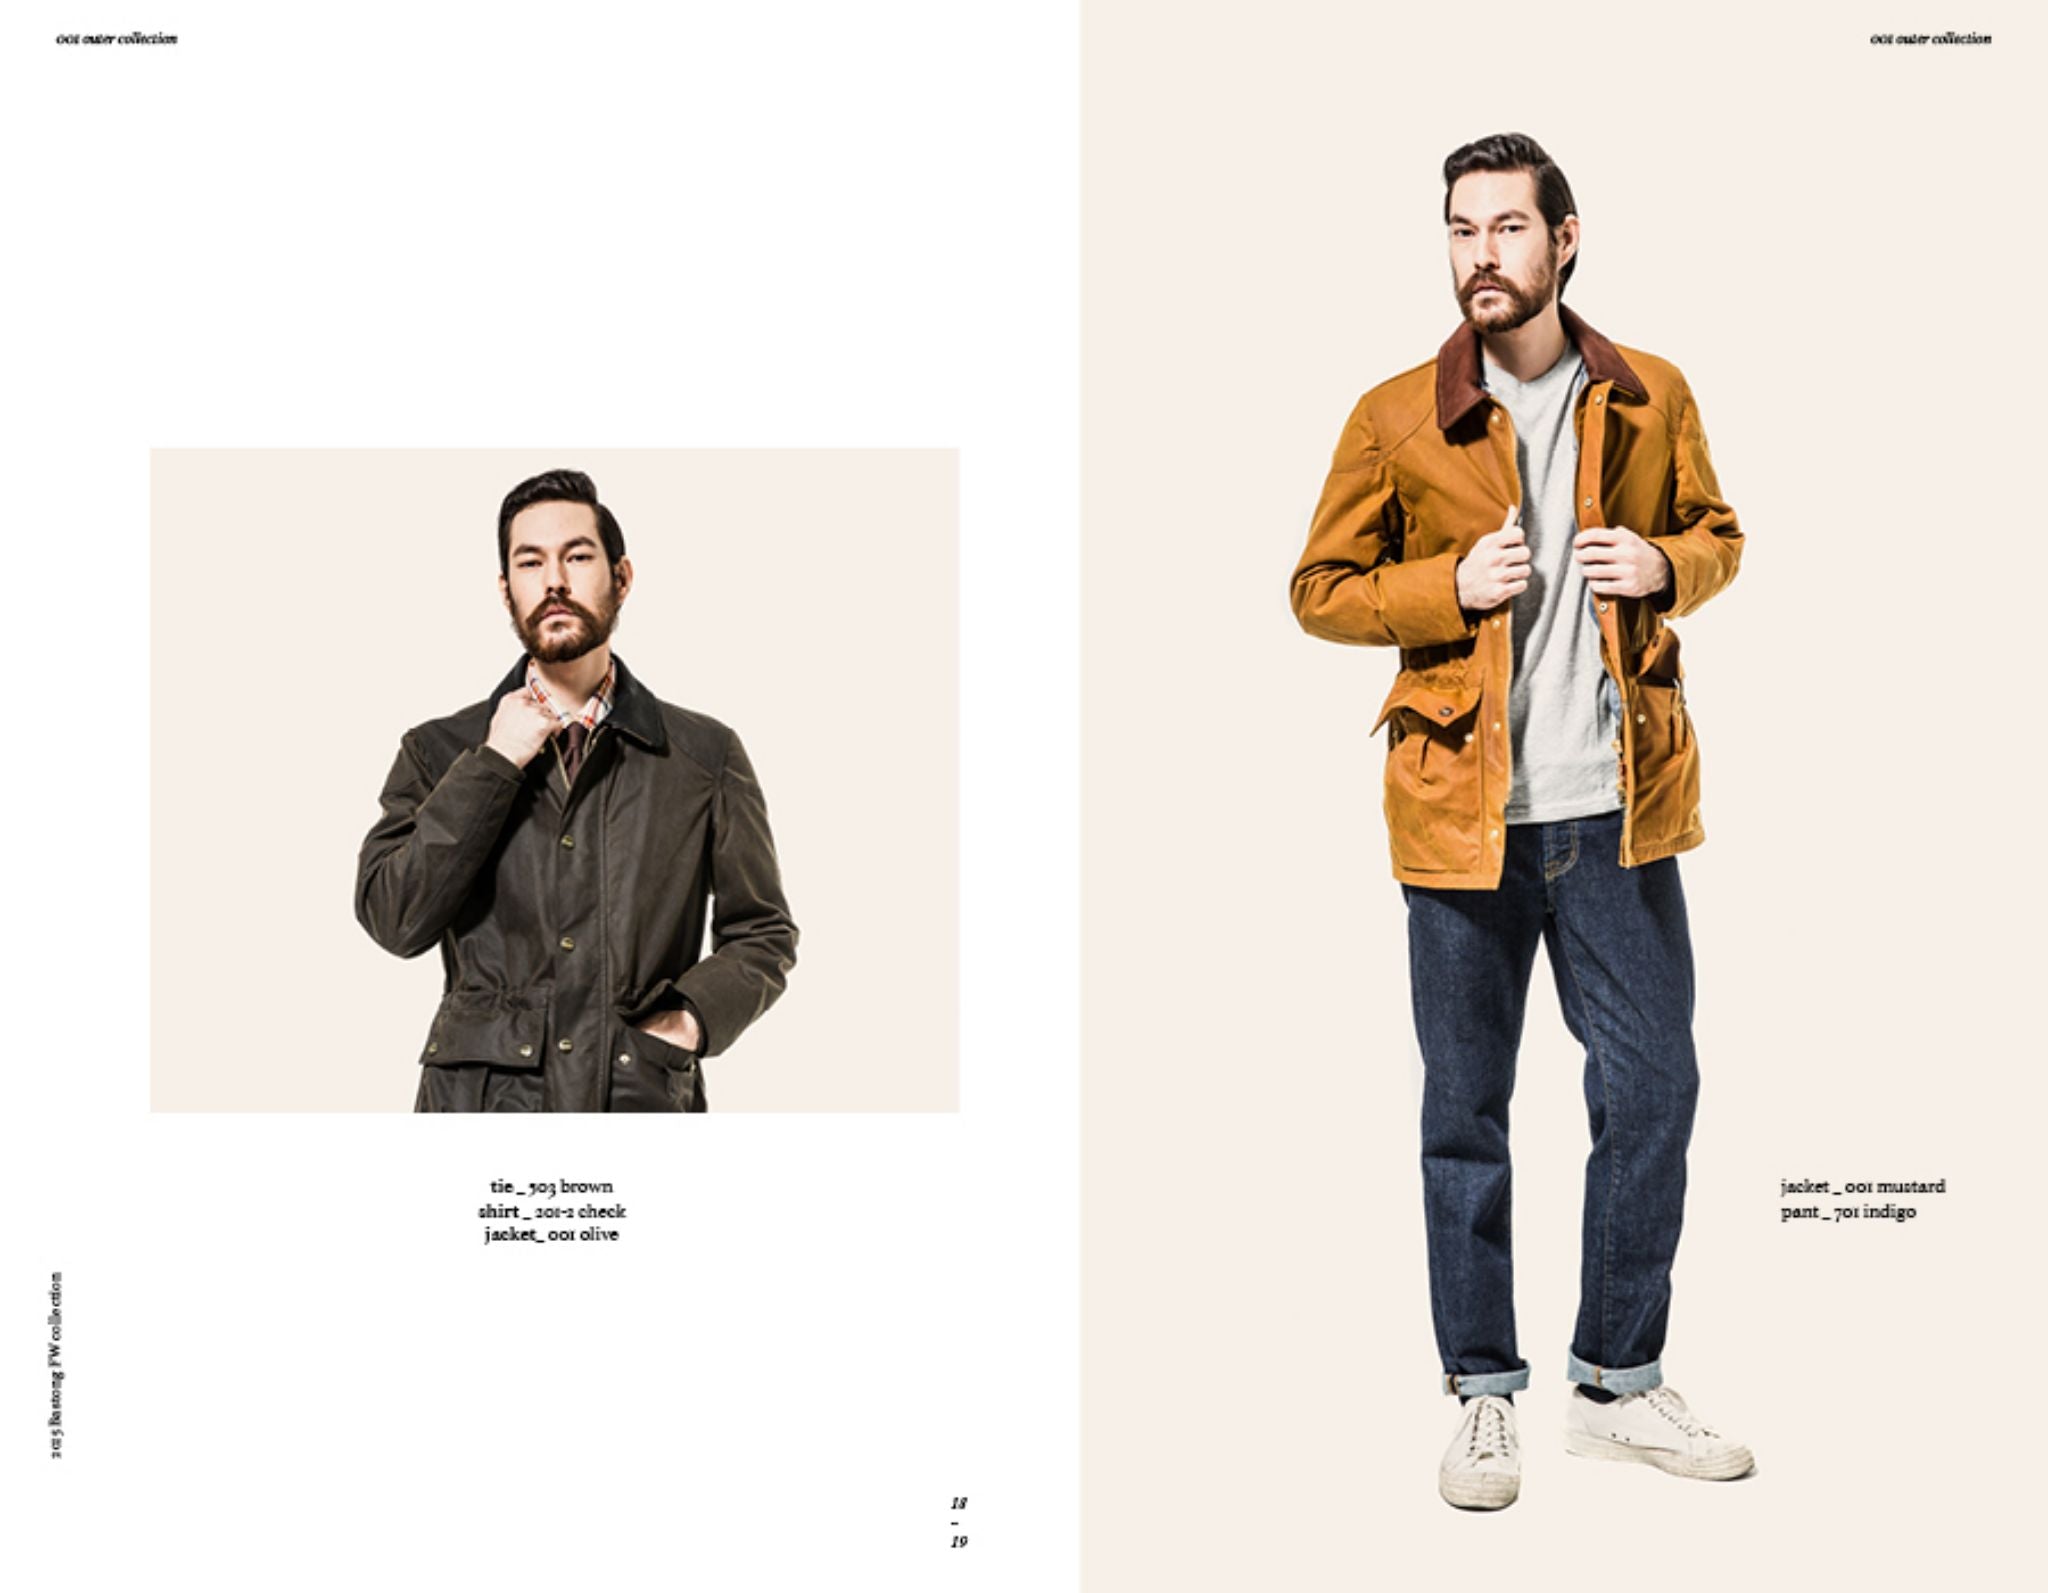 Bastong fw15 lookbook - casual style denim with waxed cotton jacket